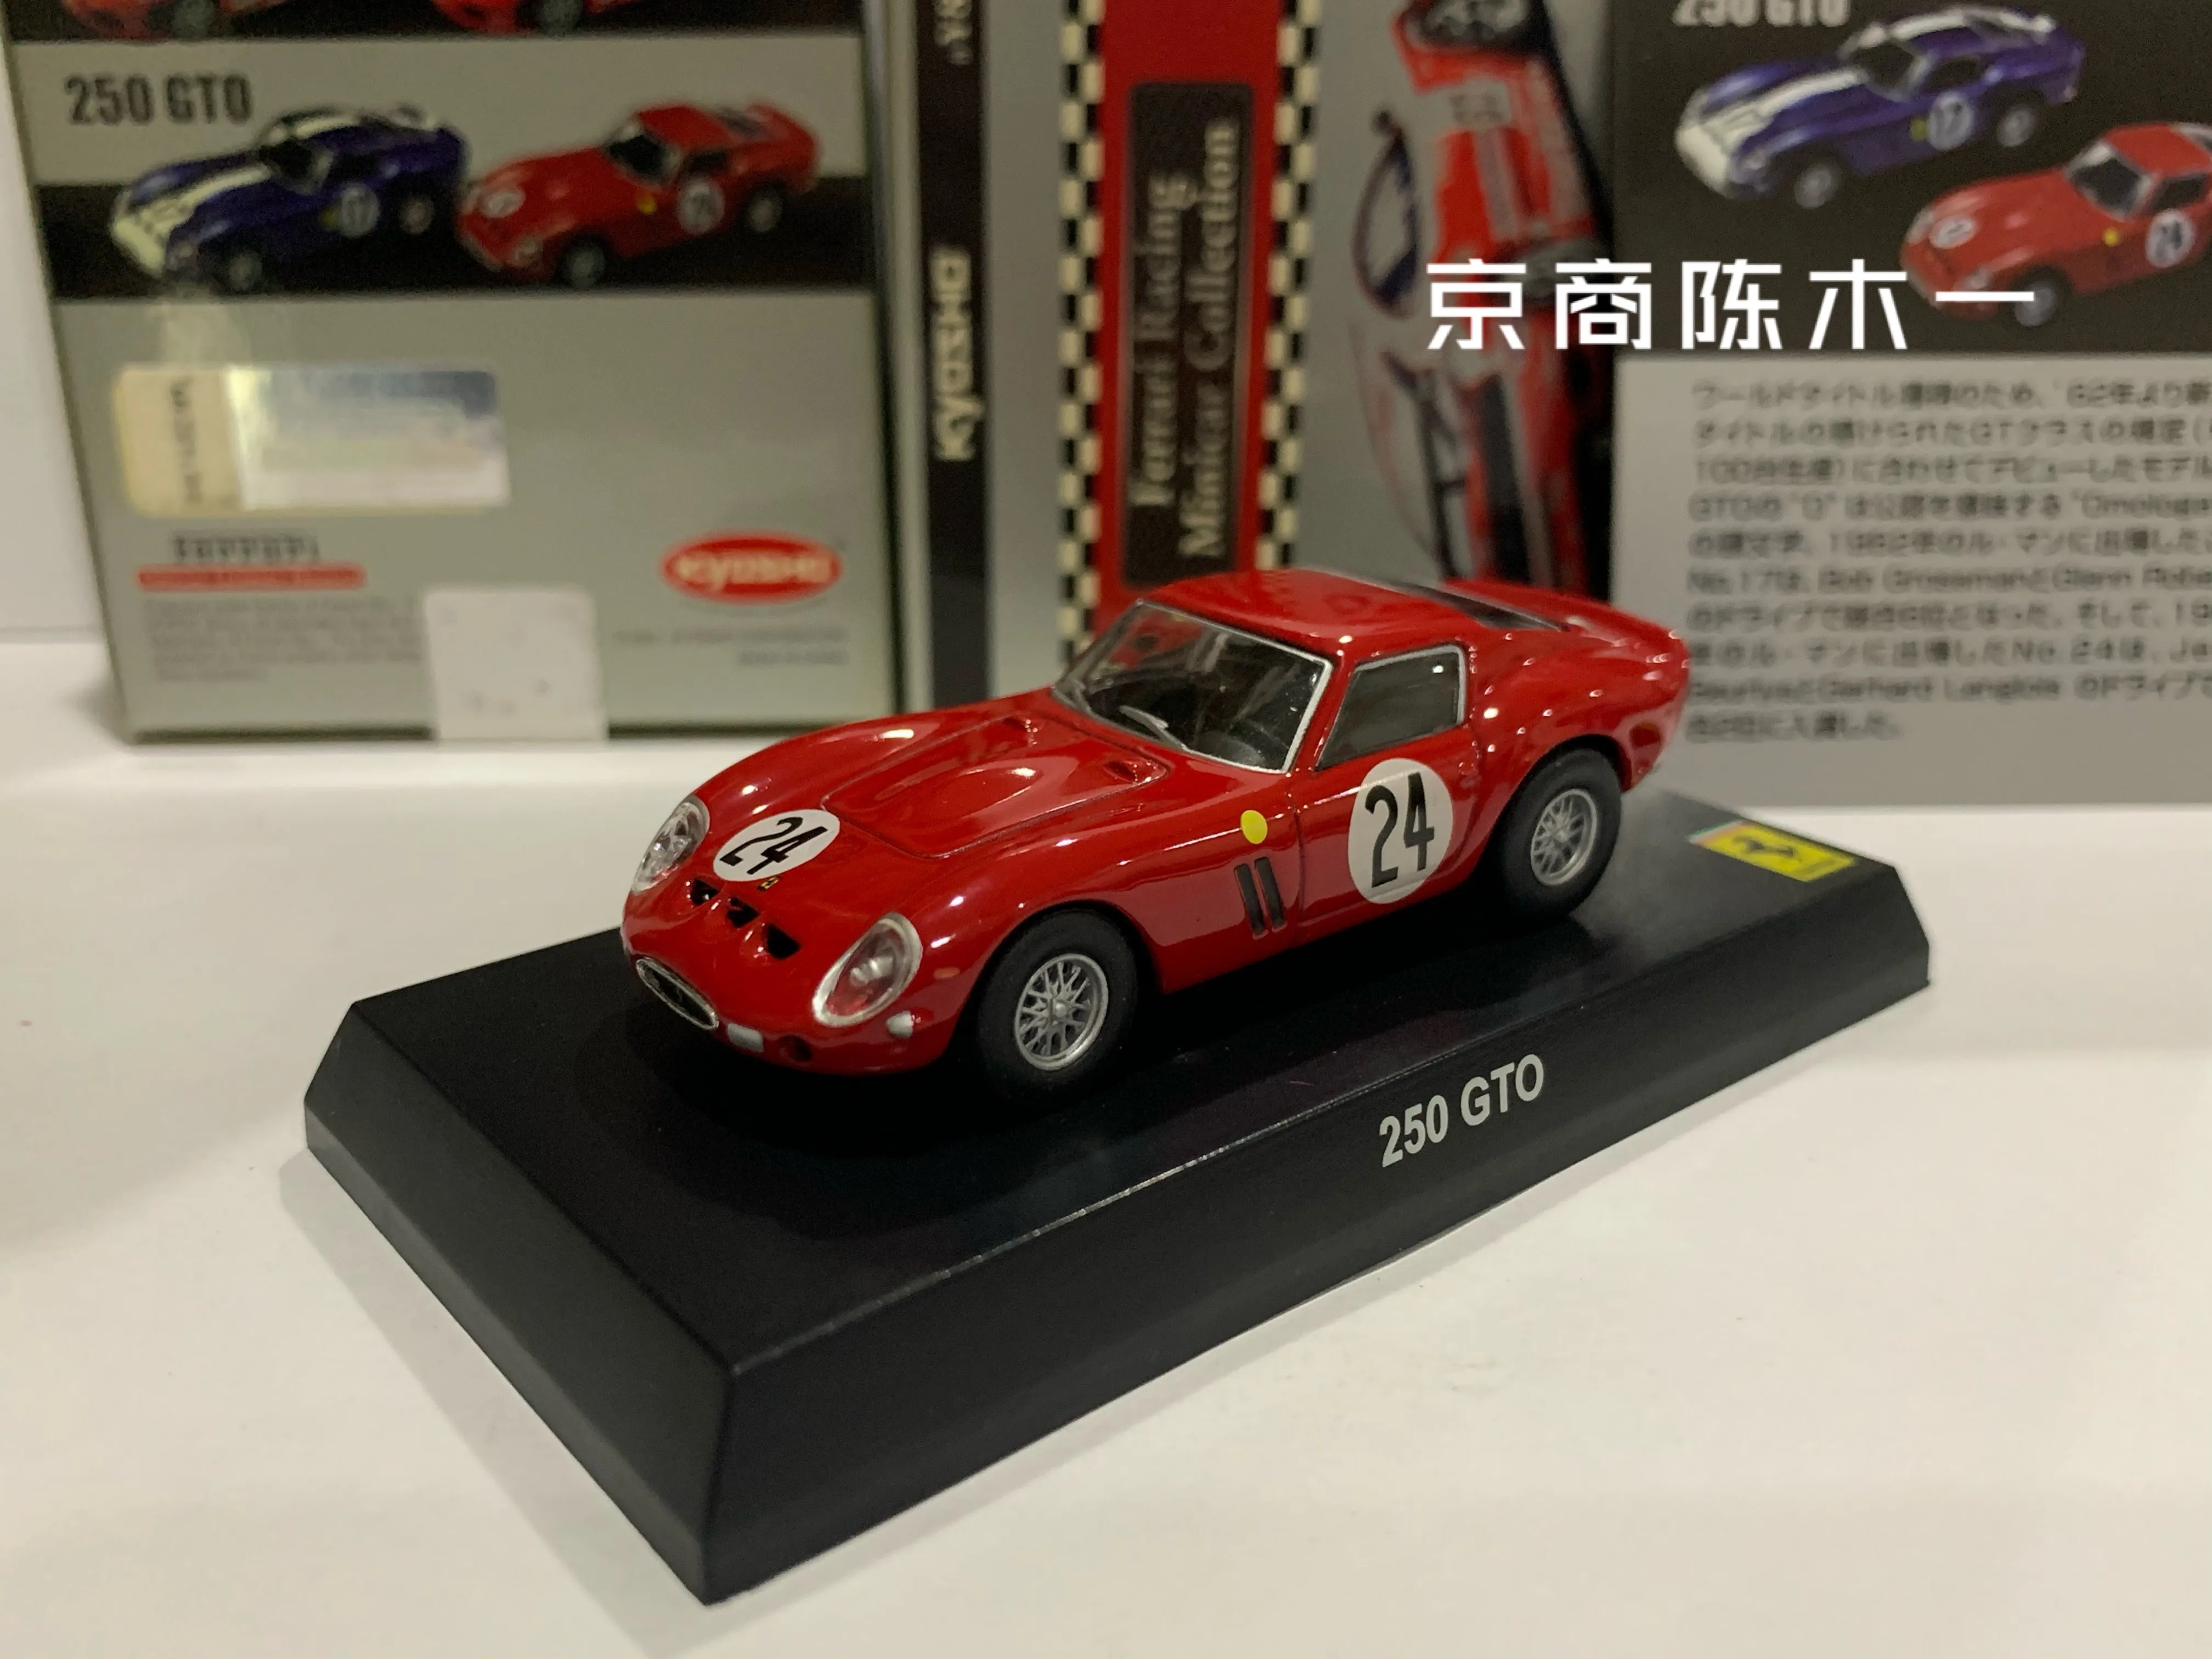 

1/64 KYOSHO Ferrari 250 GTO #24 Le Mans racing car Collection of die-cast alloy car decoration model toys